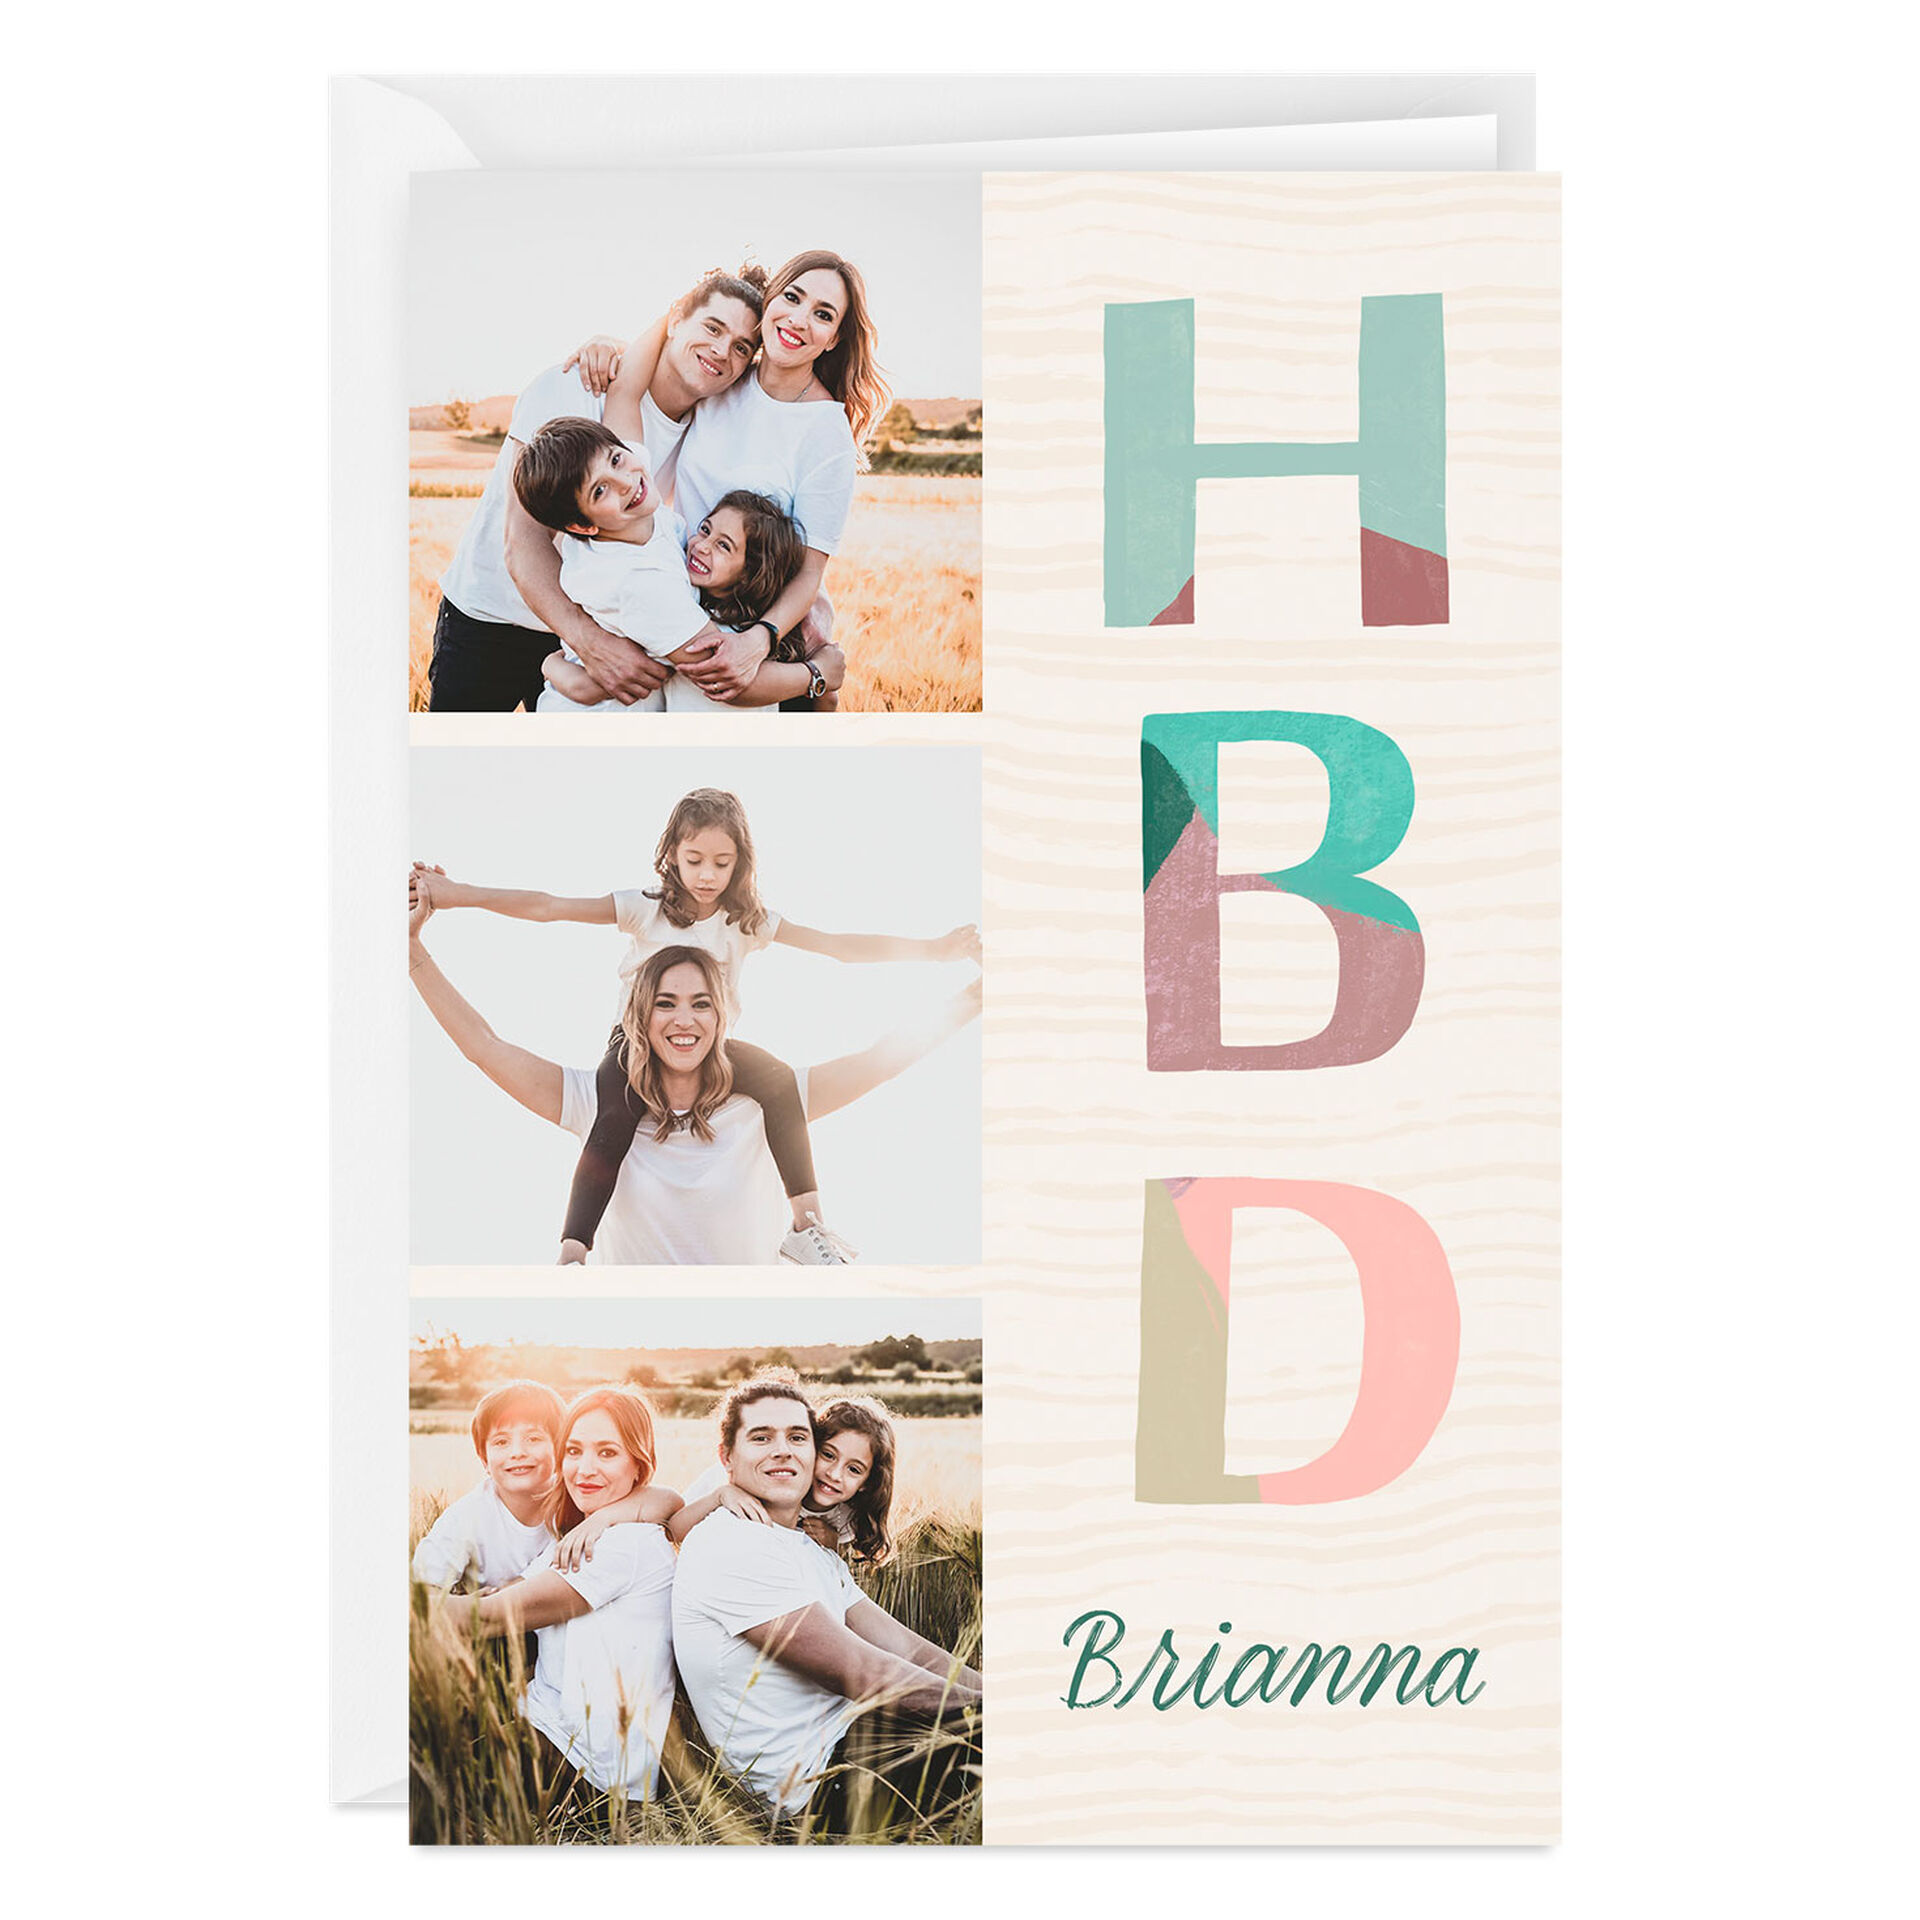 Personalized-HBD-Photo-Collage-Birthday-Photo-Card_2PGM1214_01